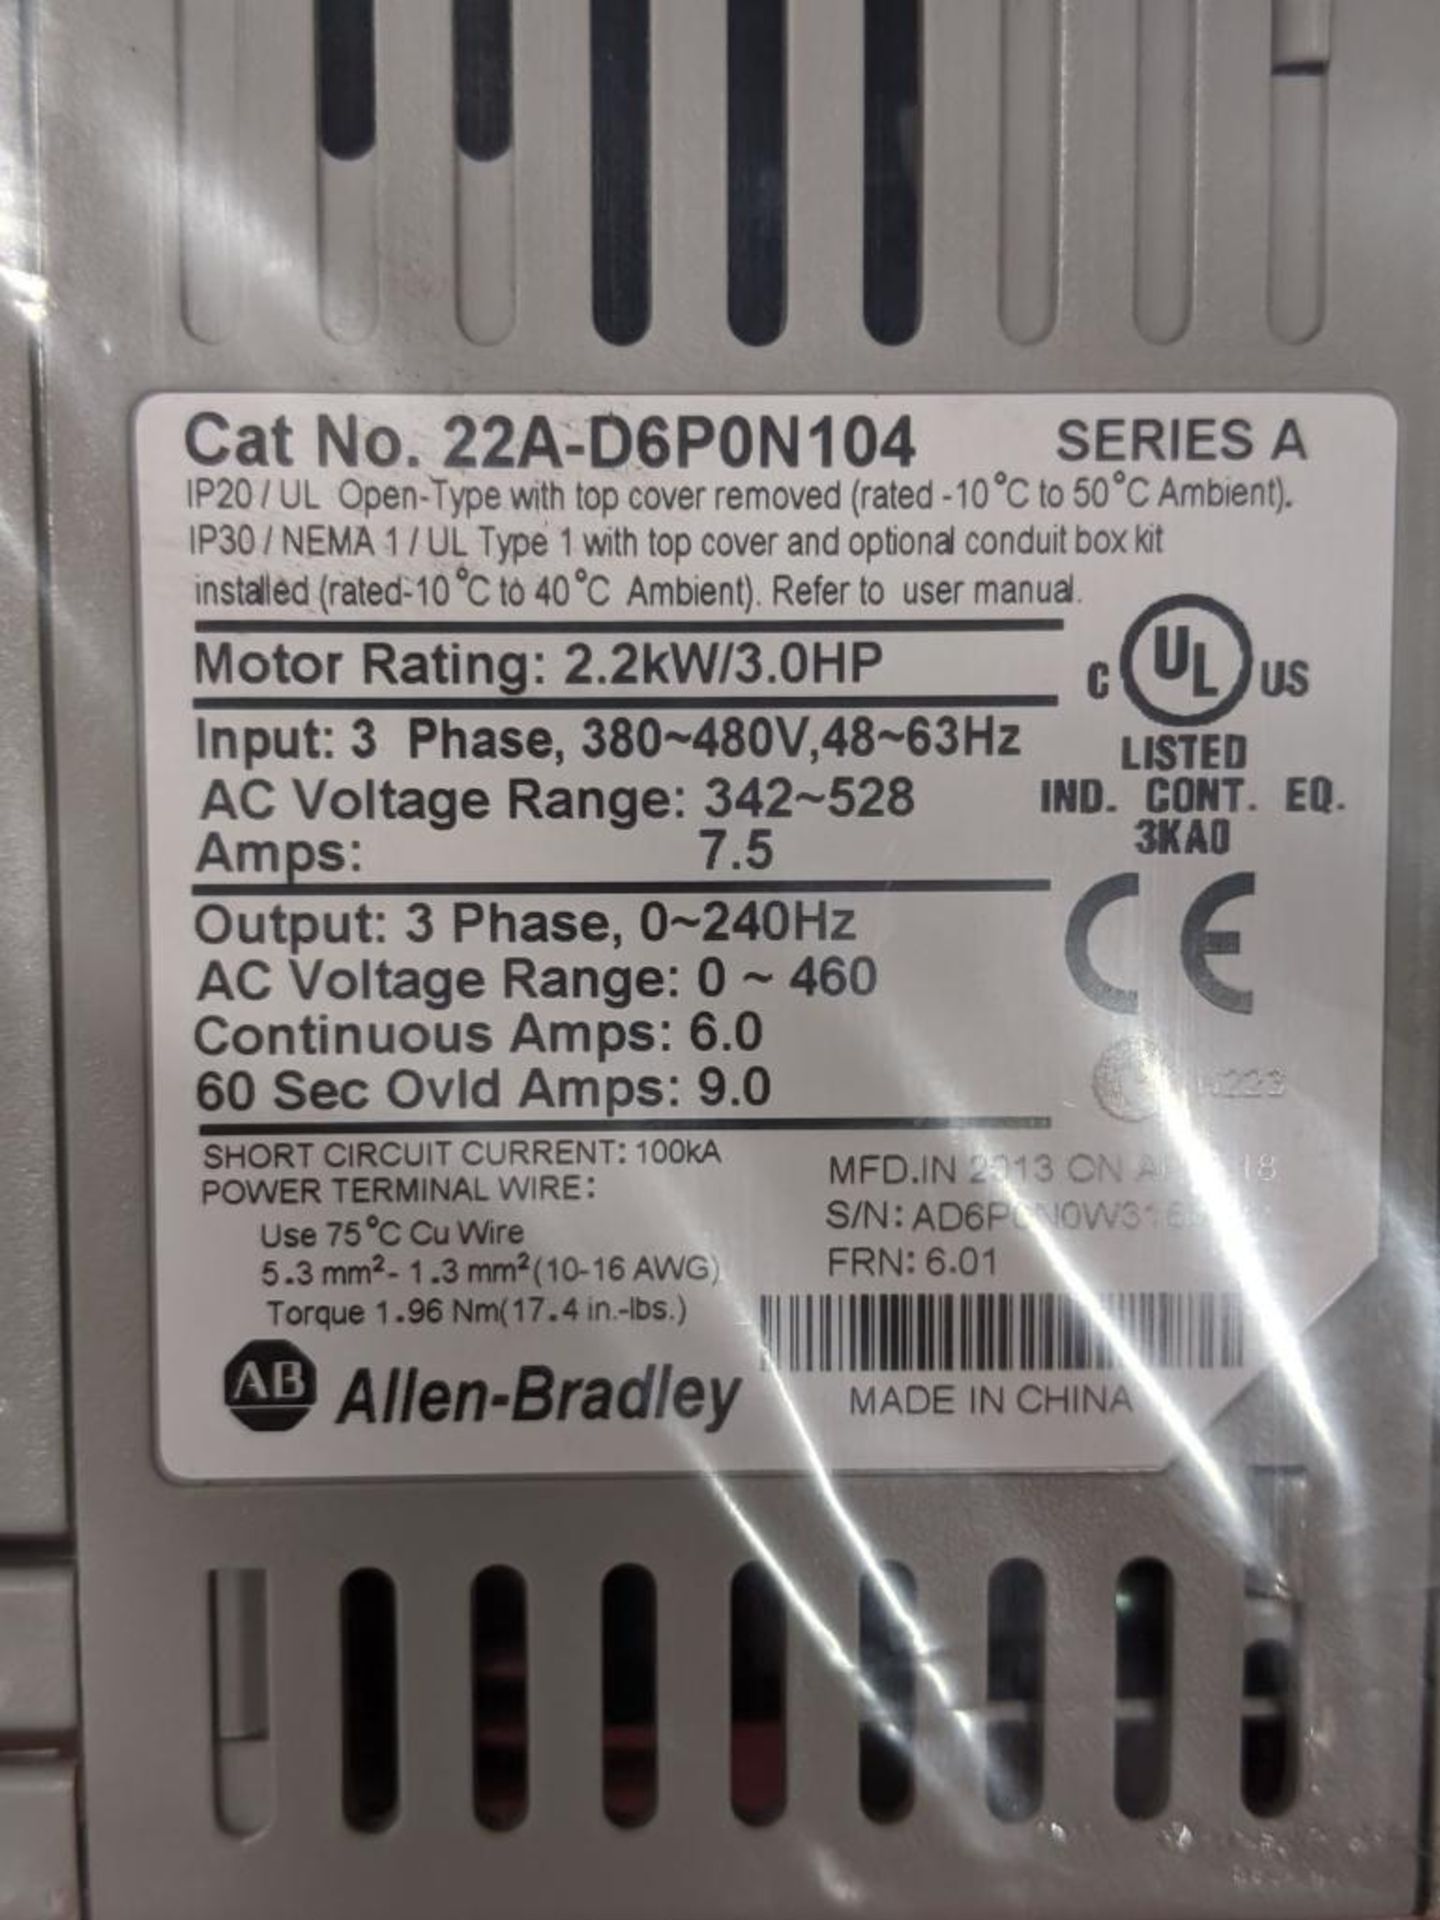 NEW Allen-Bradley PowerFlex 4 Cat No. 22A-D6P0N104 3HP Variable Frequency Drive - Image 2 of 2